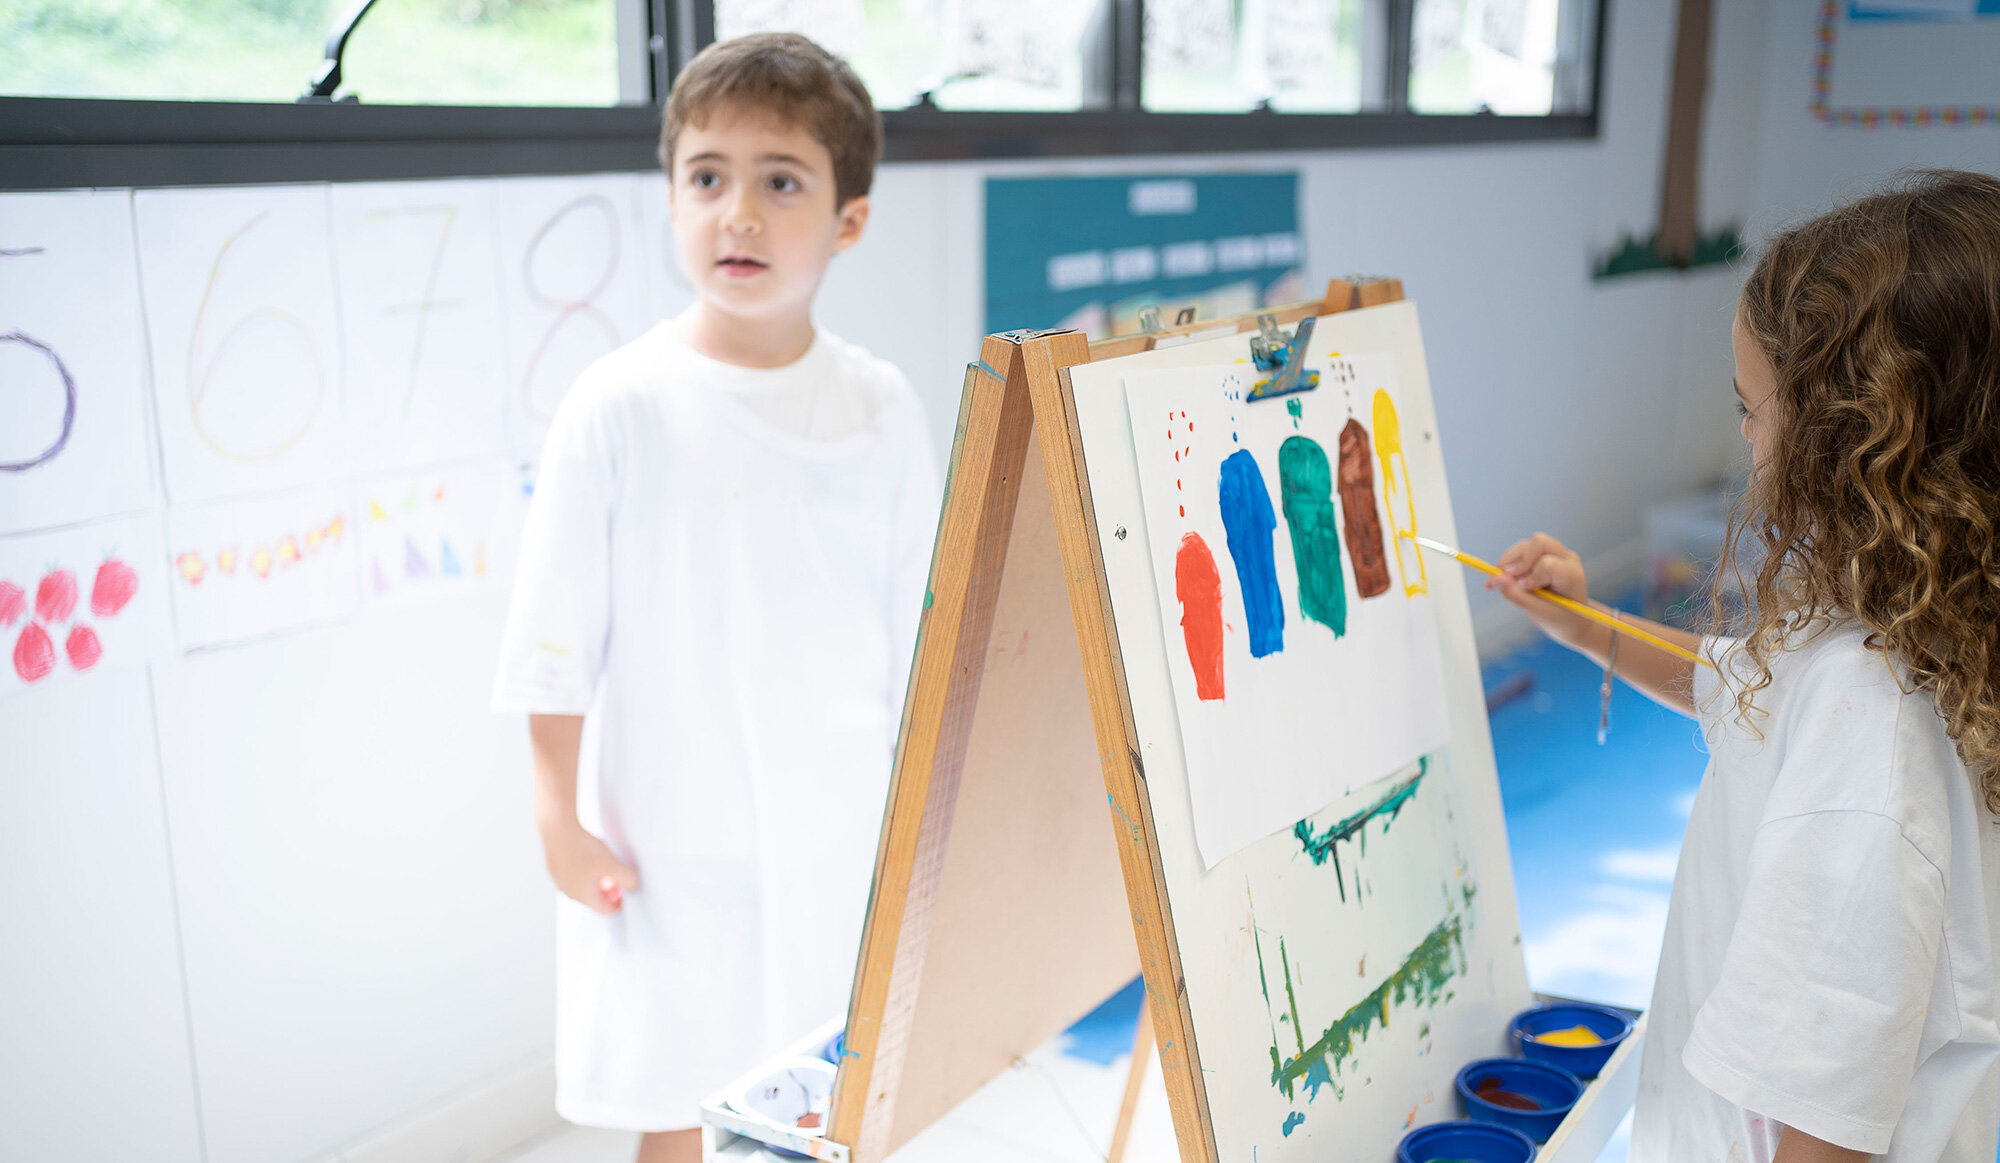 A girl in a painting smock paints coloured elements with a brush on a white sheet of paper at an easel. 